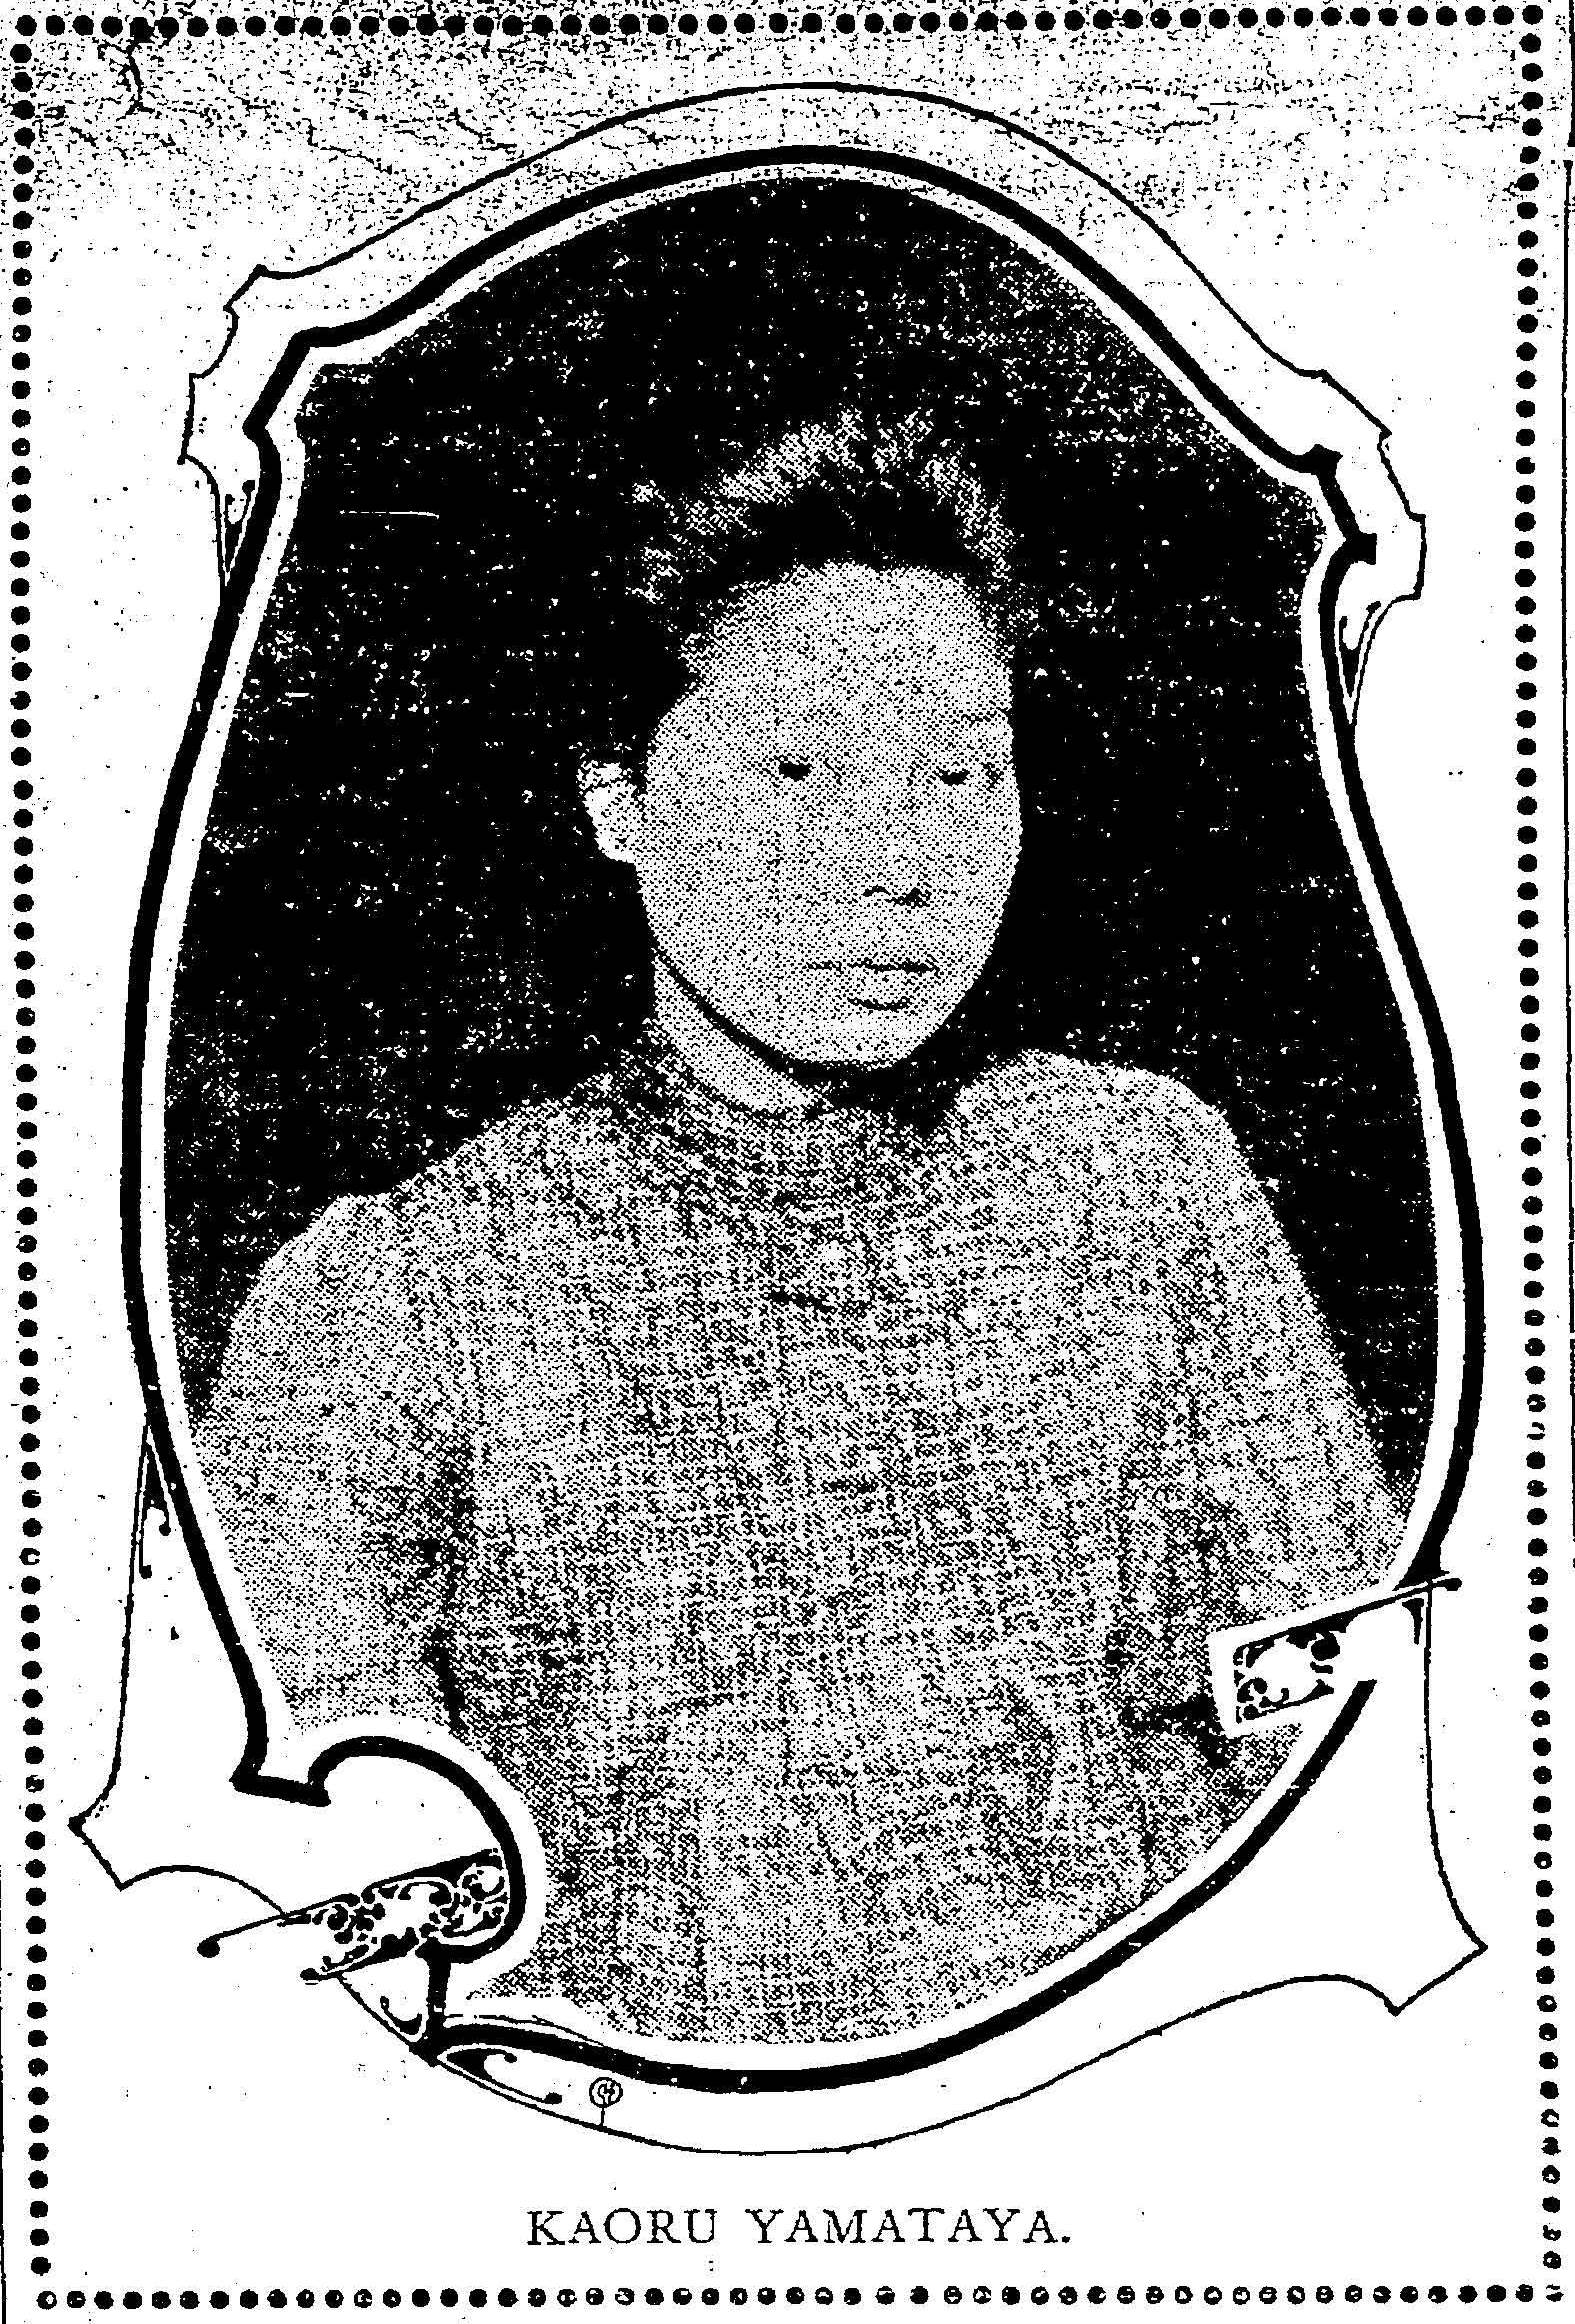 A photo of a young Japanese girl printed in the Seattle Times, likely a studio portrait from Japan taken as part of Kaoru's travel documents.